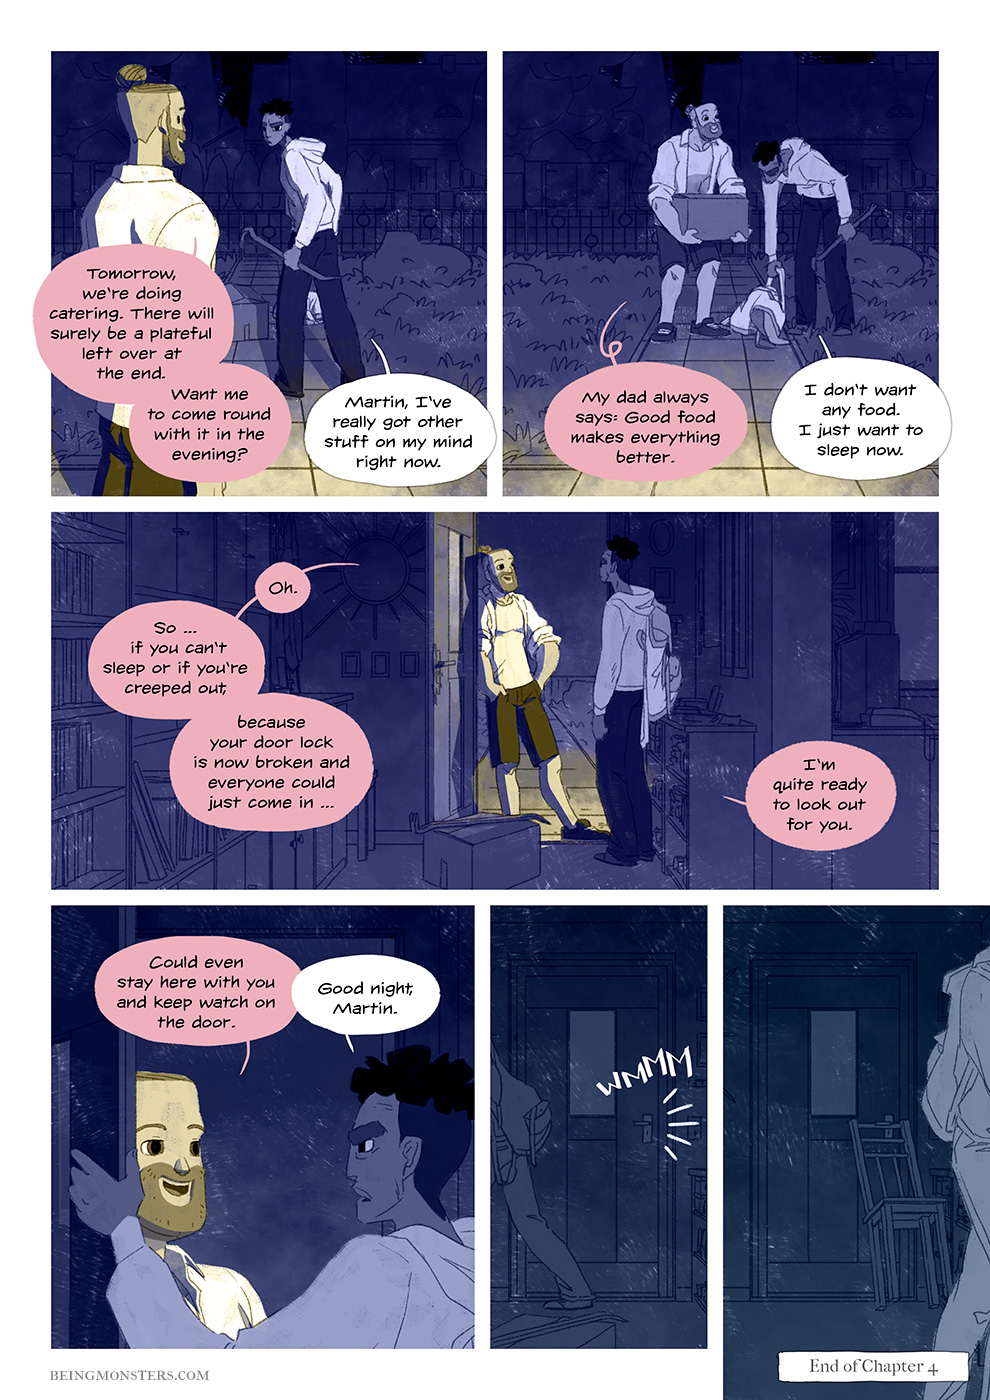 Being Monsters Book 1 Chapter 4 page 35 EN